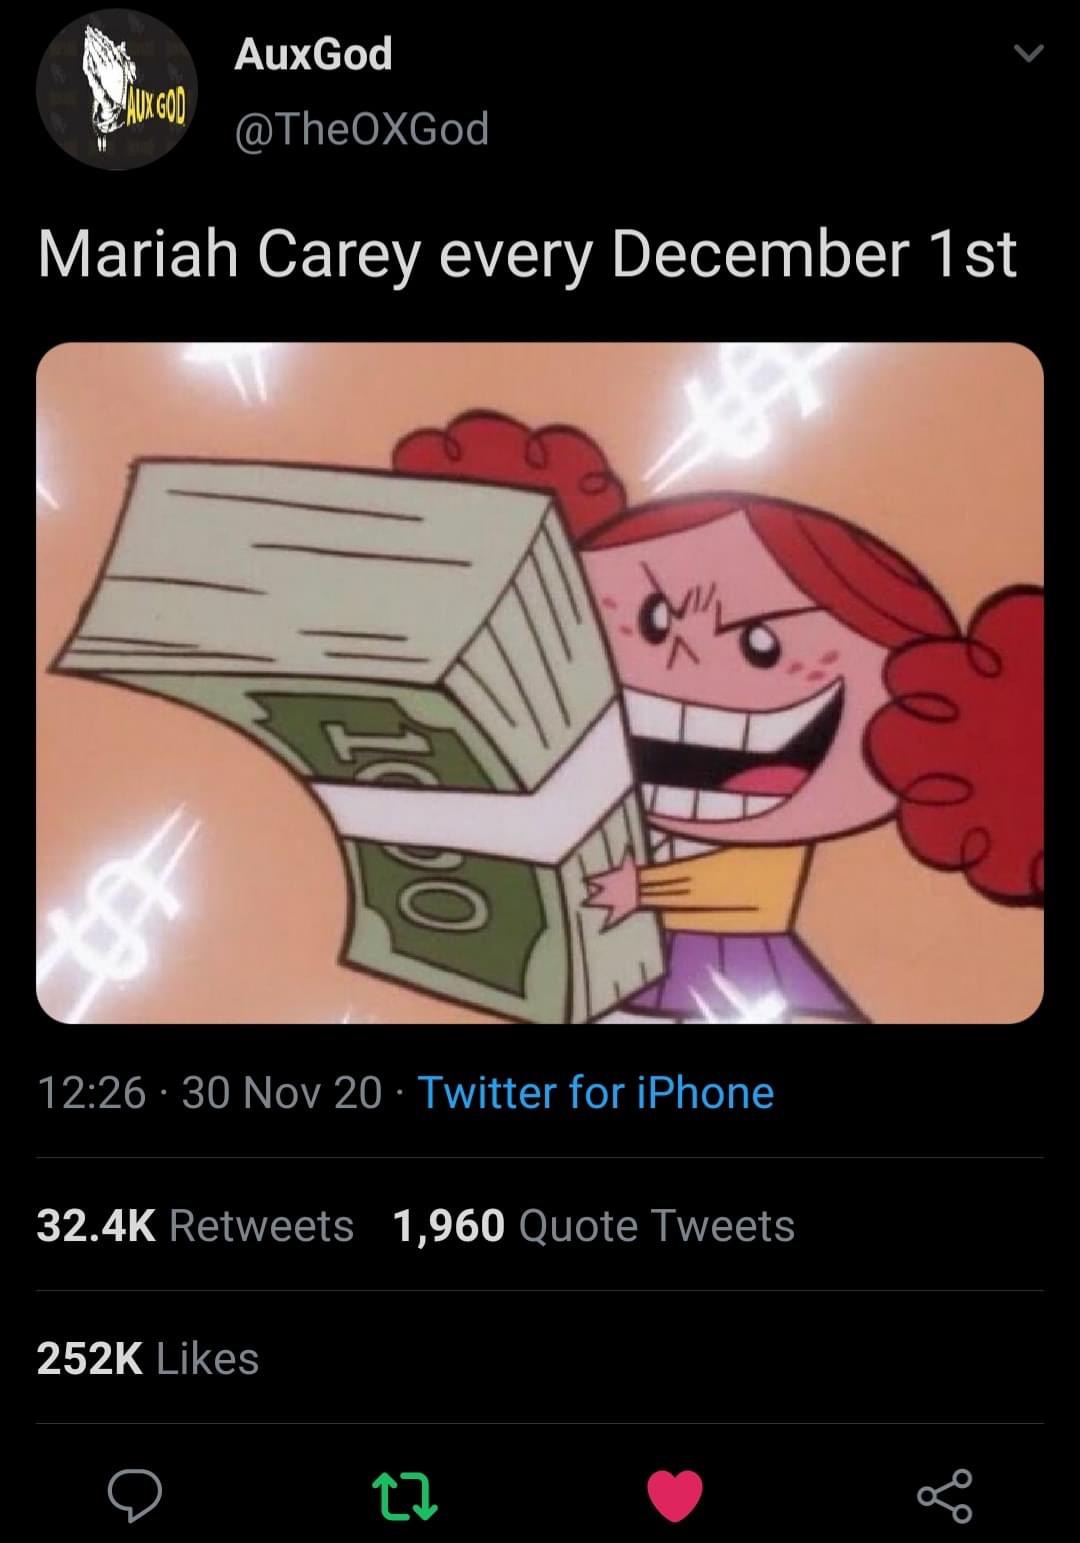 cartoon - AuxGod Aux God Mariah Carey every December 1st 30 Nov 20 Twitter for iPhone 1,960 Quote Tweets m2 go